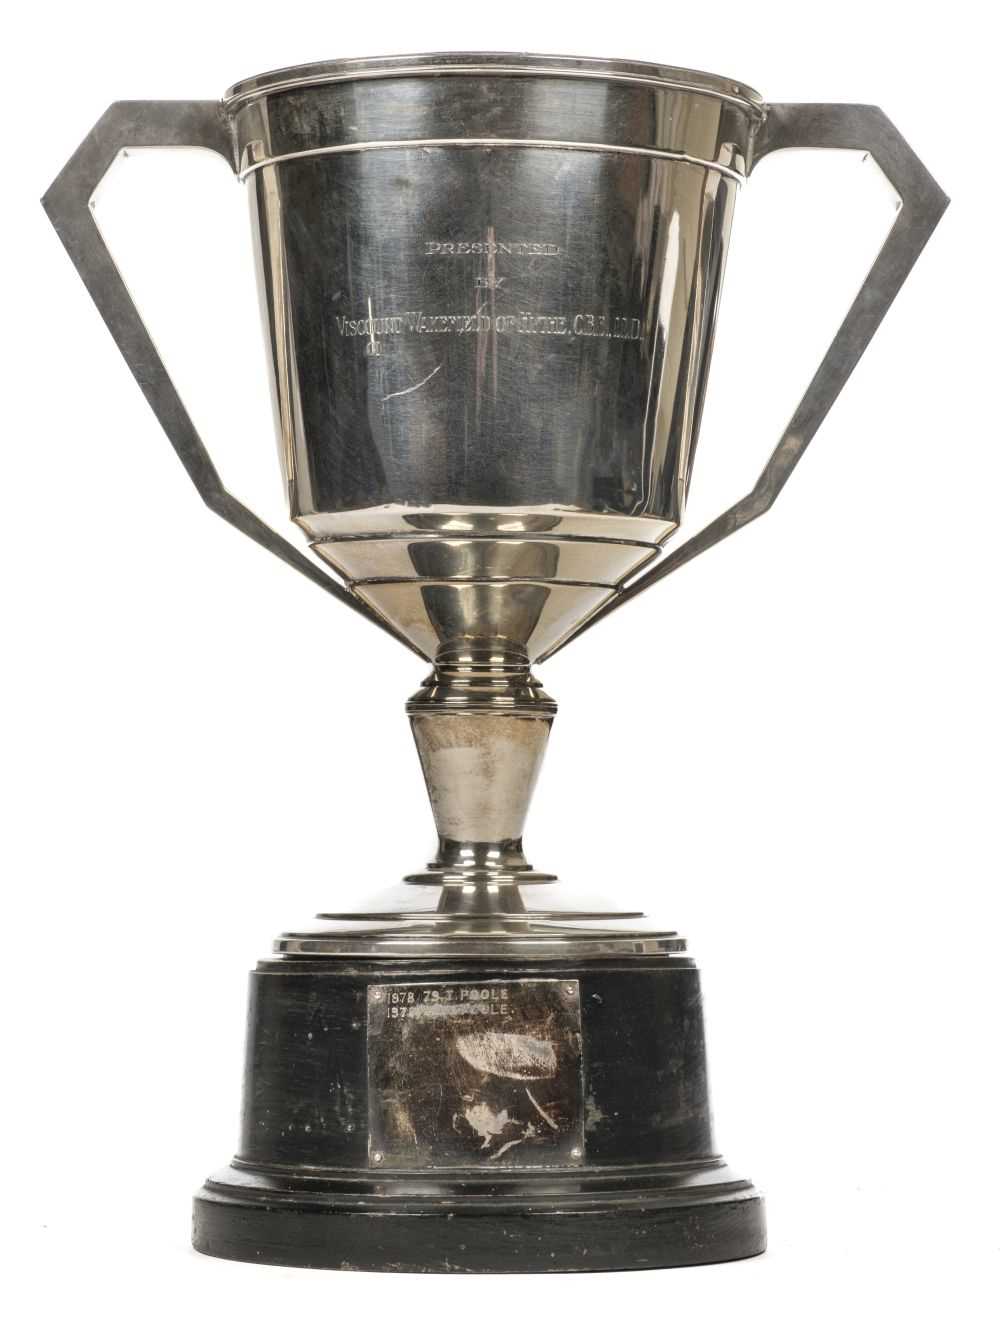 Lot 88 - Northamptonshire Aero Club. A fine & large Art-Deco silver trophy cup by Adie brothers, c. 1931